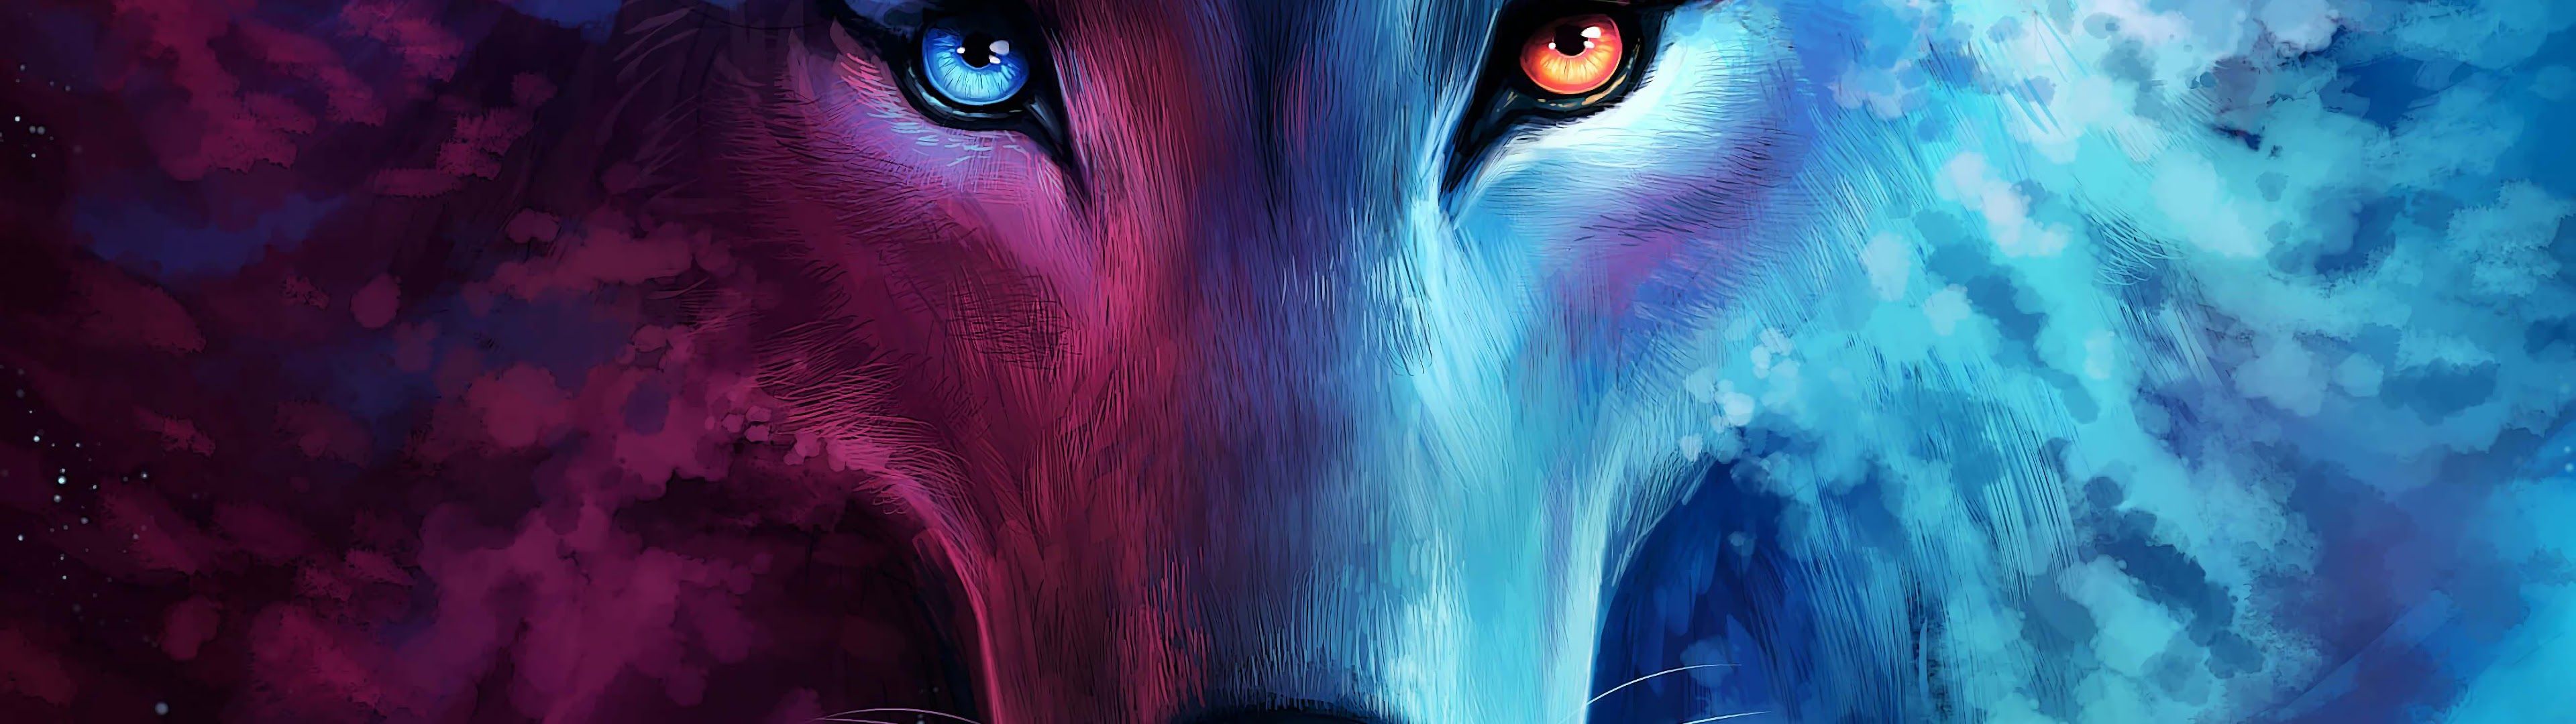 Wolf, Fantasy, Art, 4k, And Blue Wolf